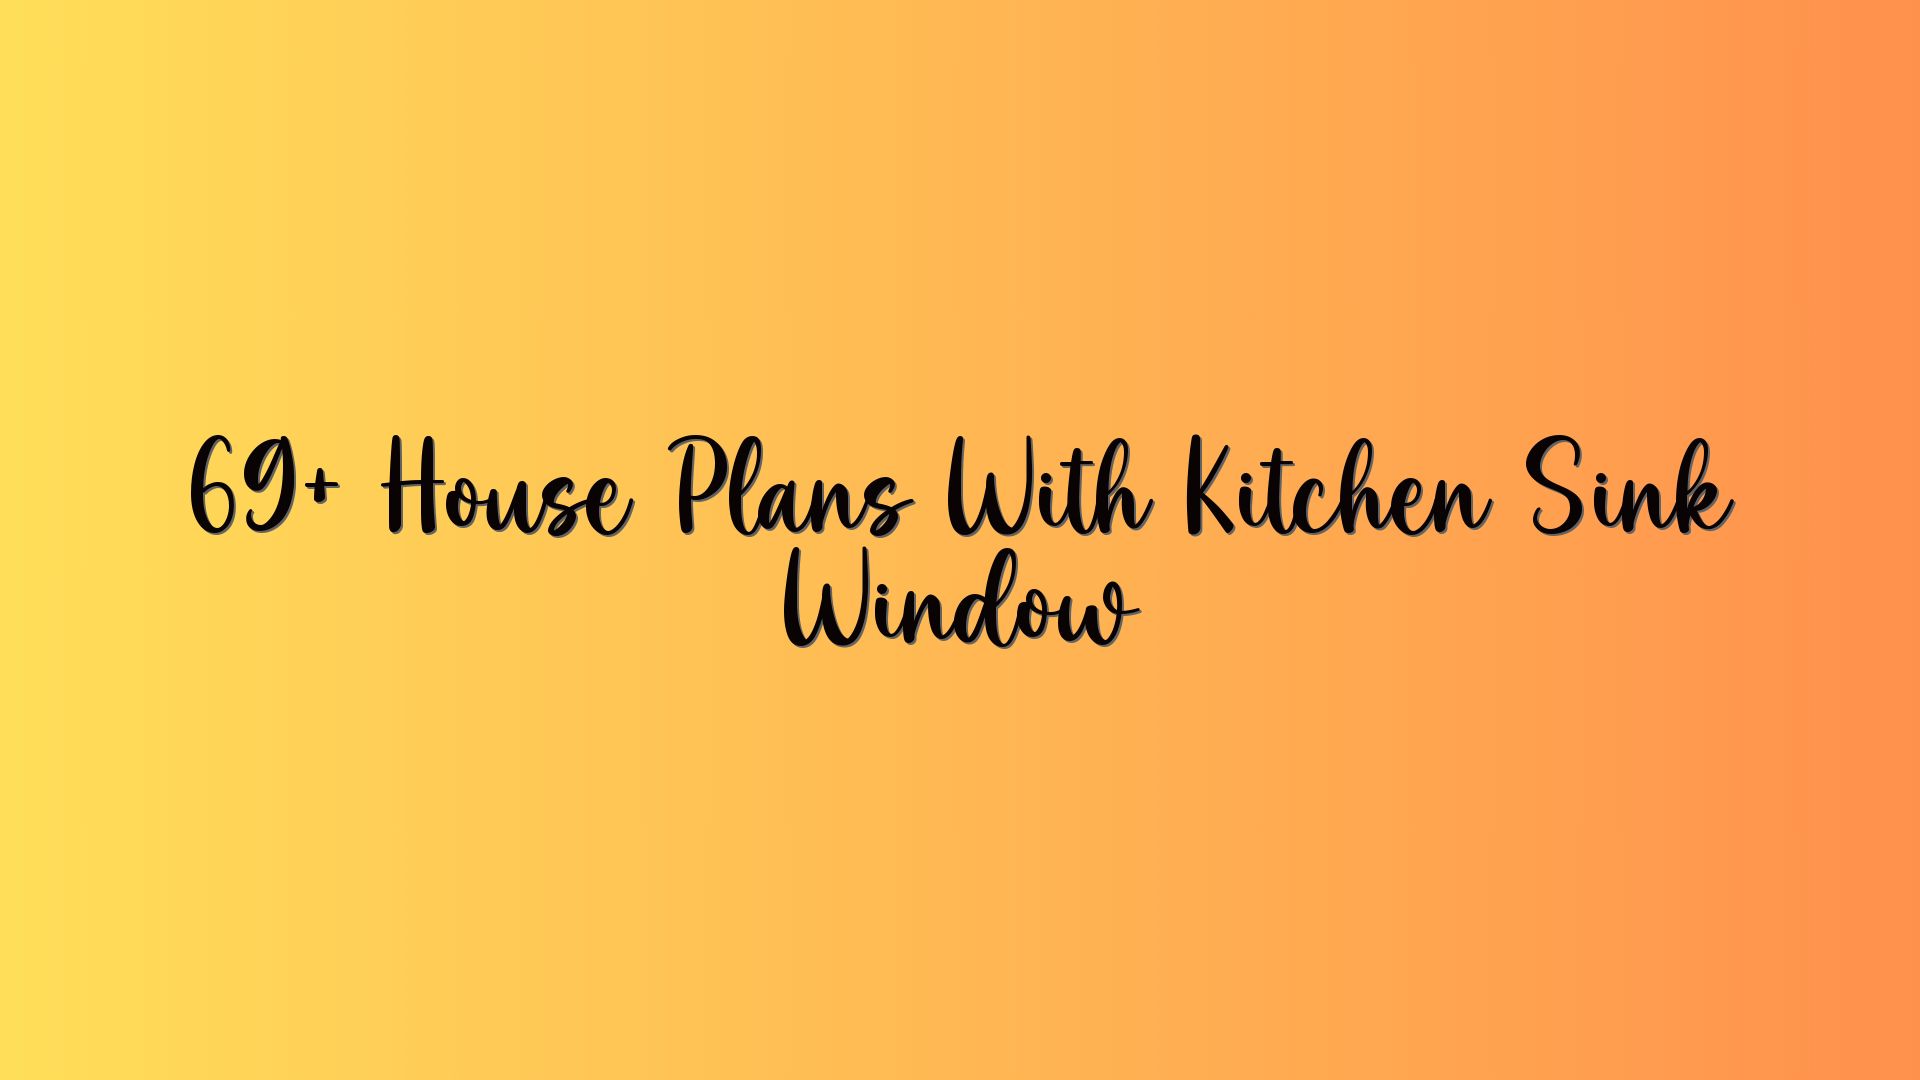 69+ House Plans With Kitchen Sink Window